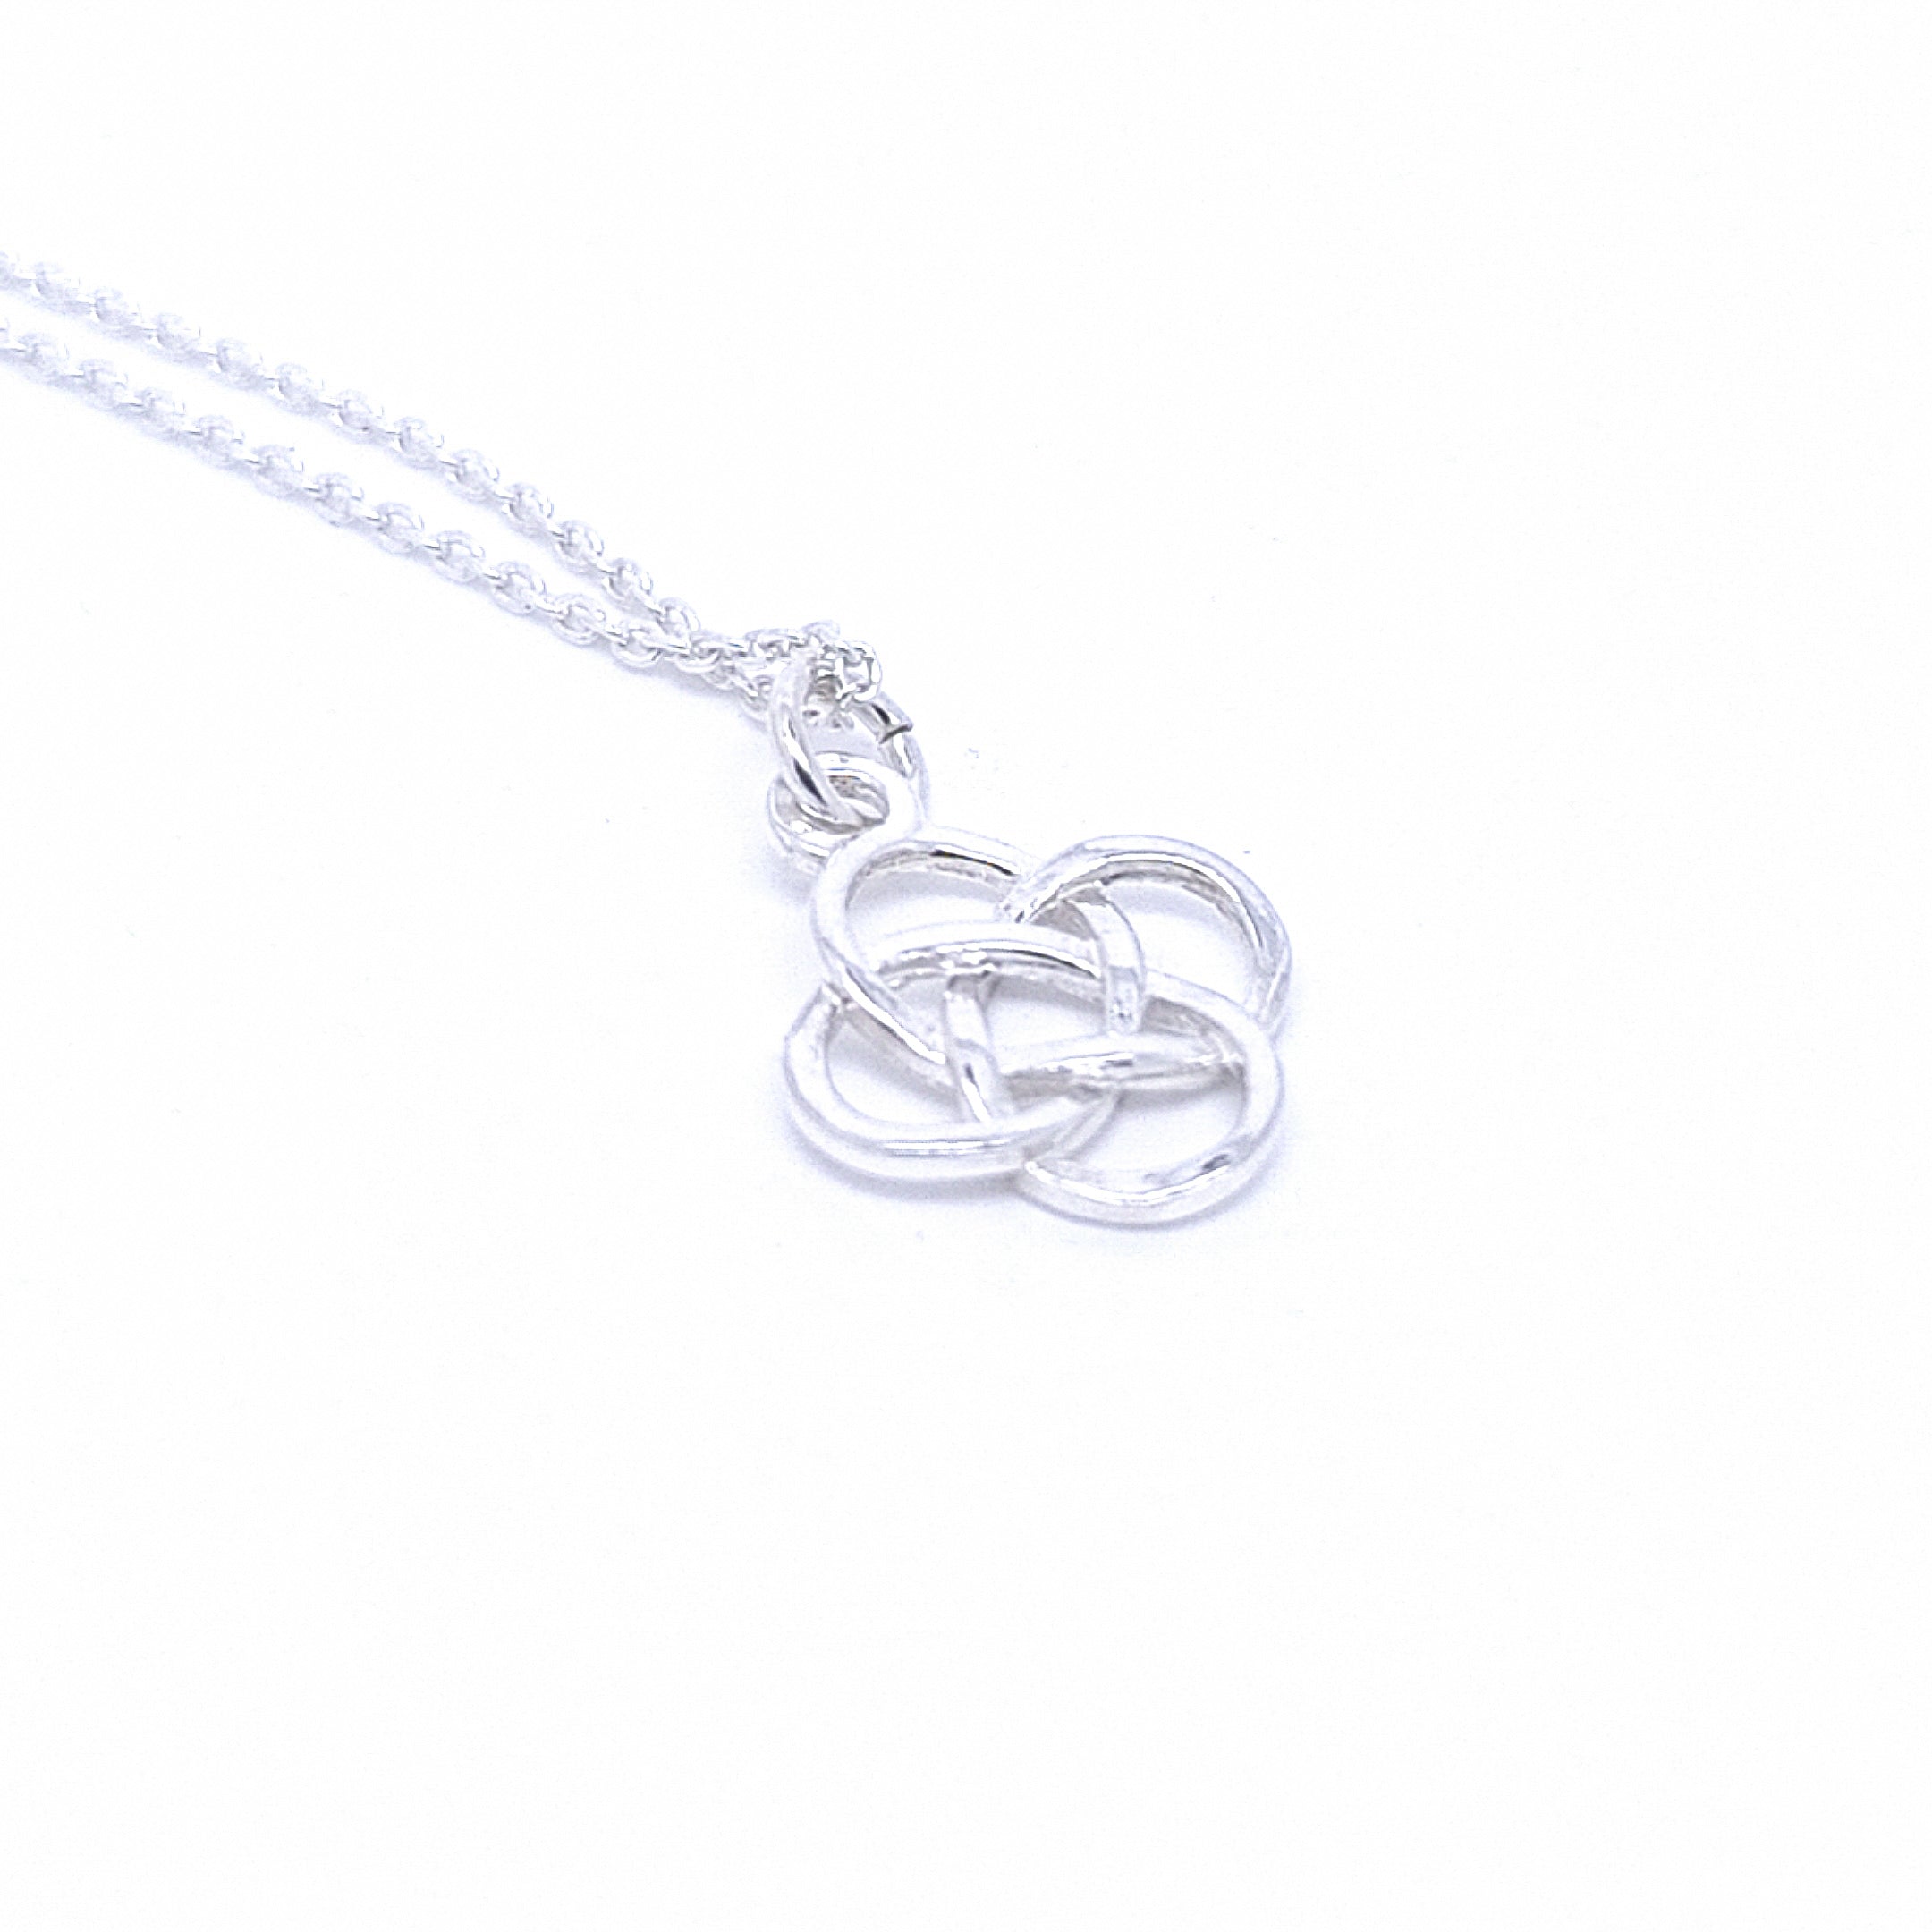 Intricate Love Knot Silver Pendant on a 45cm Sterling Silver Chain by Magpie Gems.